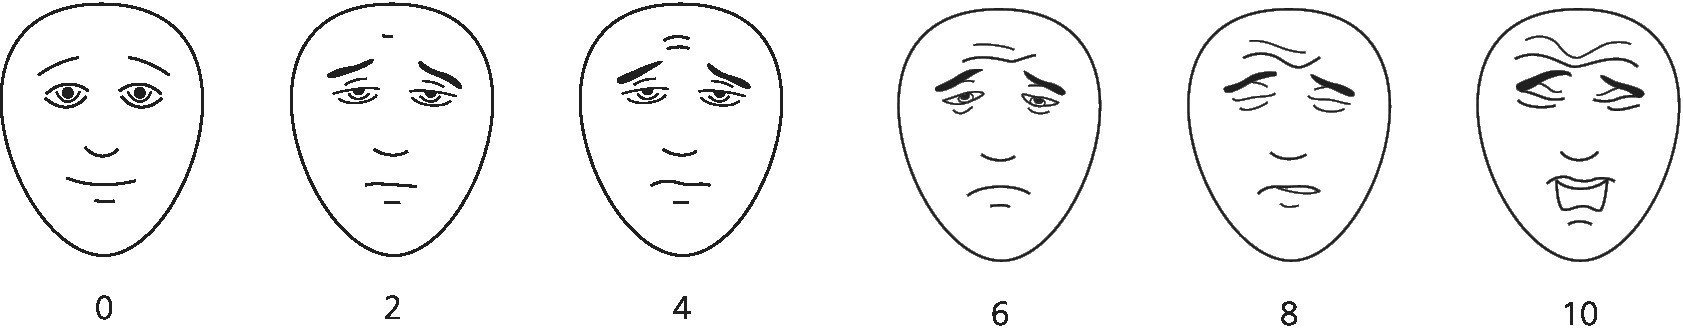 Faces Pain Scale–Revised (FPS-R) images.